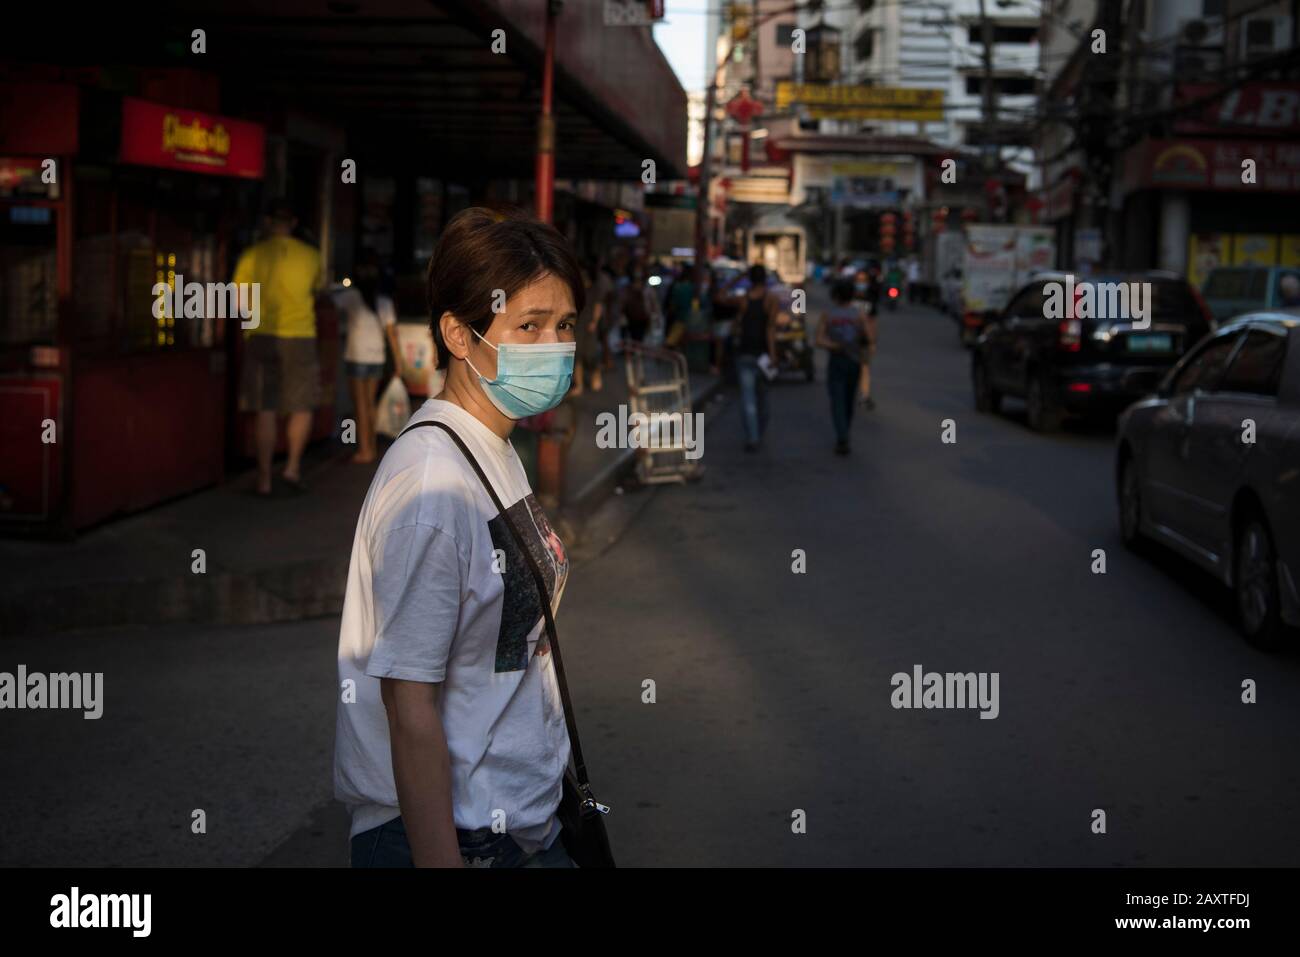 Manila, Philippines. 12th Feb, 2020. A woman wears a face mask in Manila's Chinatown district as a precaution to the outbreak of the coronavirus. Filipinos remain anxious over a new coronavirus known as Covid-19 which originated in Wuhan, China in December 2019. The Philippines' Department of Health announced the country's first death due to the virus on 2 February - the first reported death outside of China. The number of 2019-nCoV cases worldwide has already surpassed that of the 2003 Sars epidemic, with the death toll now over 1300. Credit: SOPA Images Limited/Alamy Live News Stock Photo